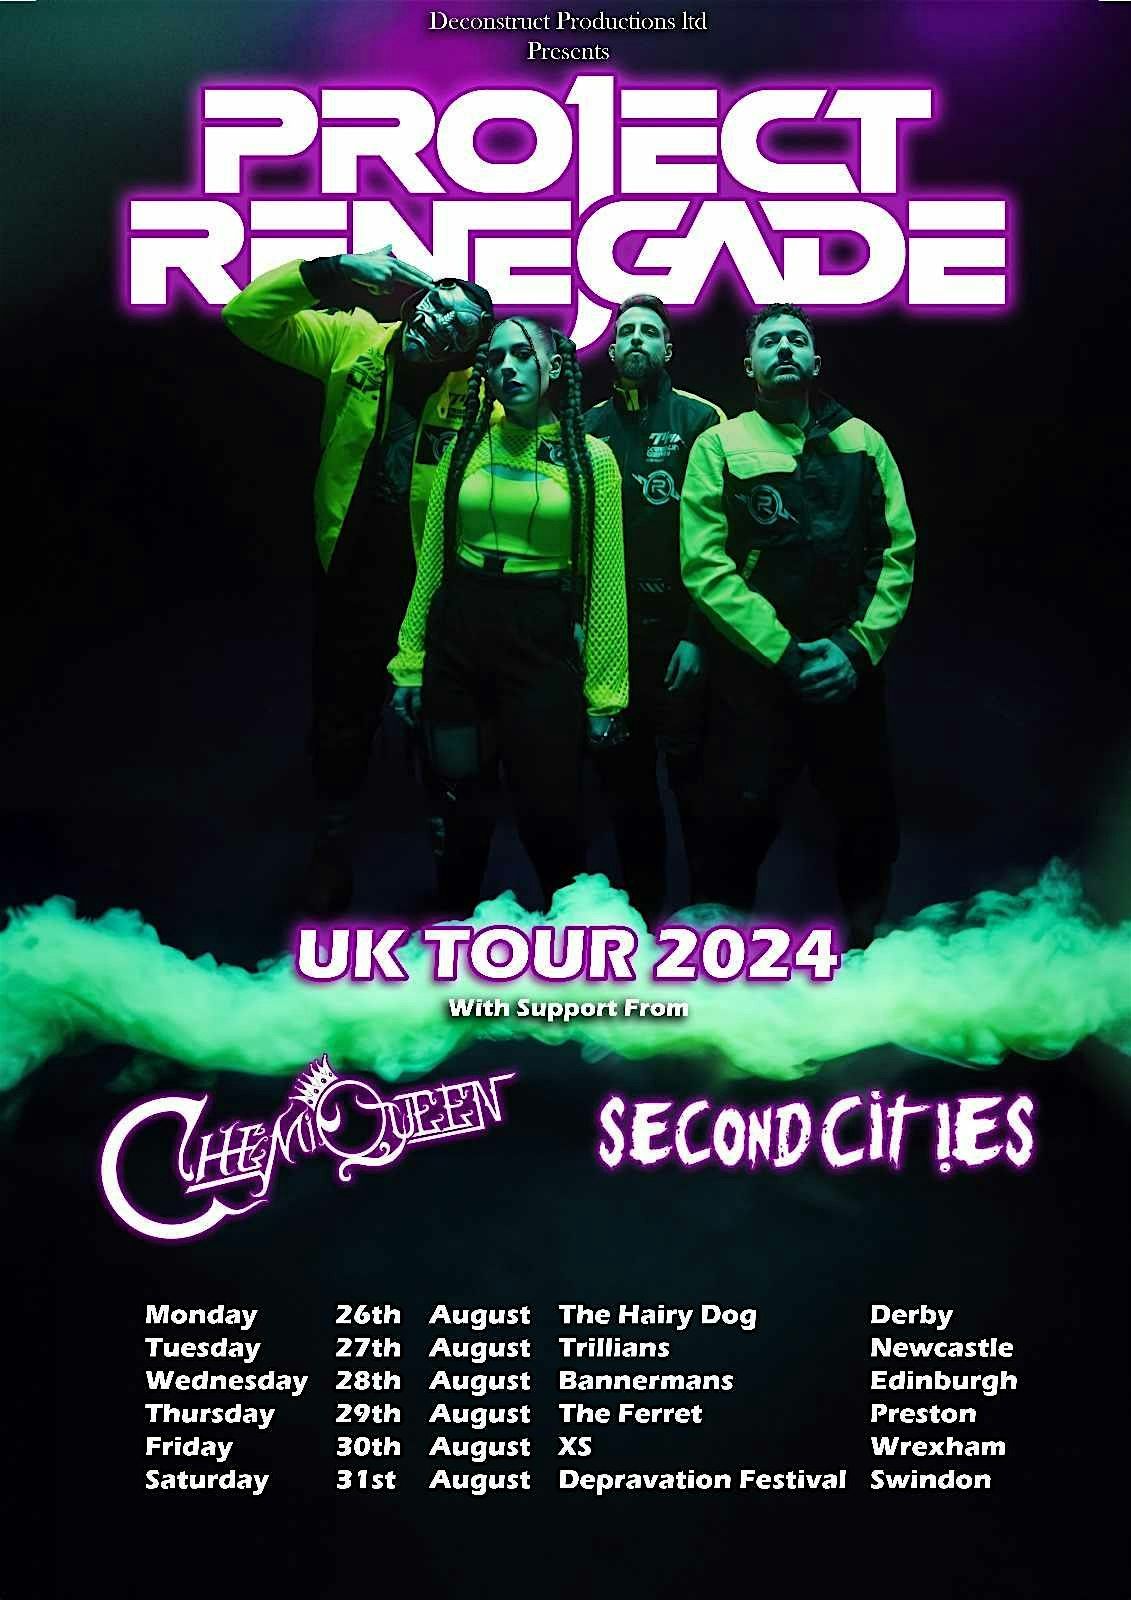 Project Renegade UK Tour 2024 | Chemiqueen & Second Cities